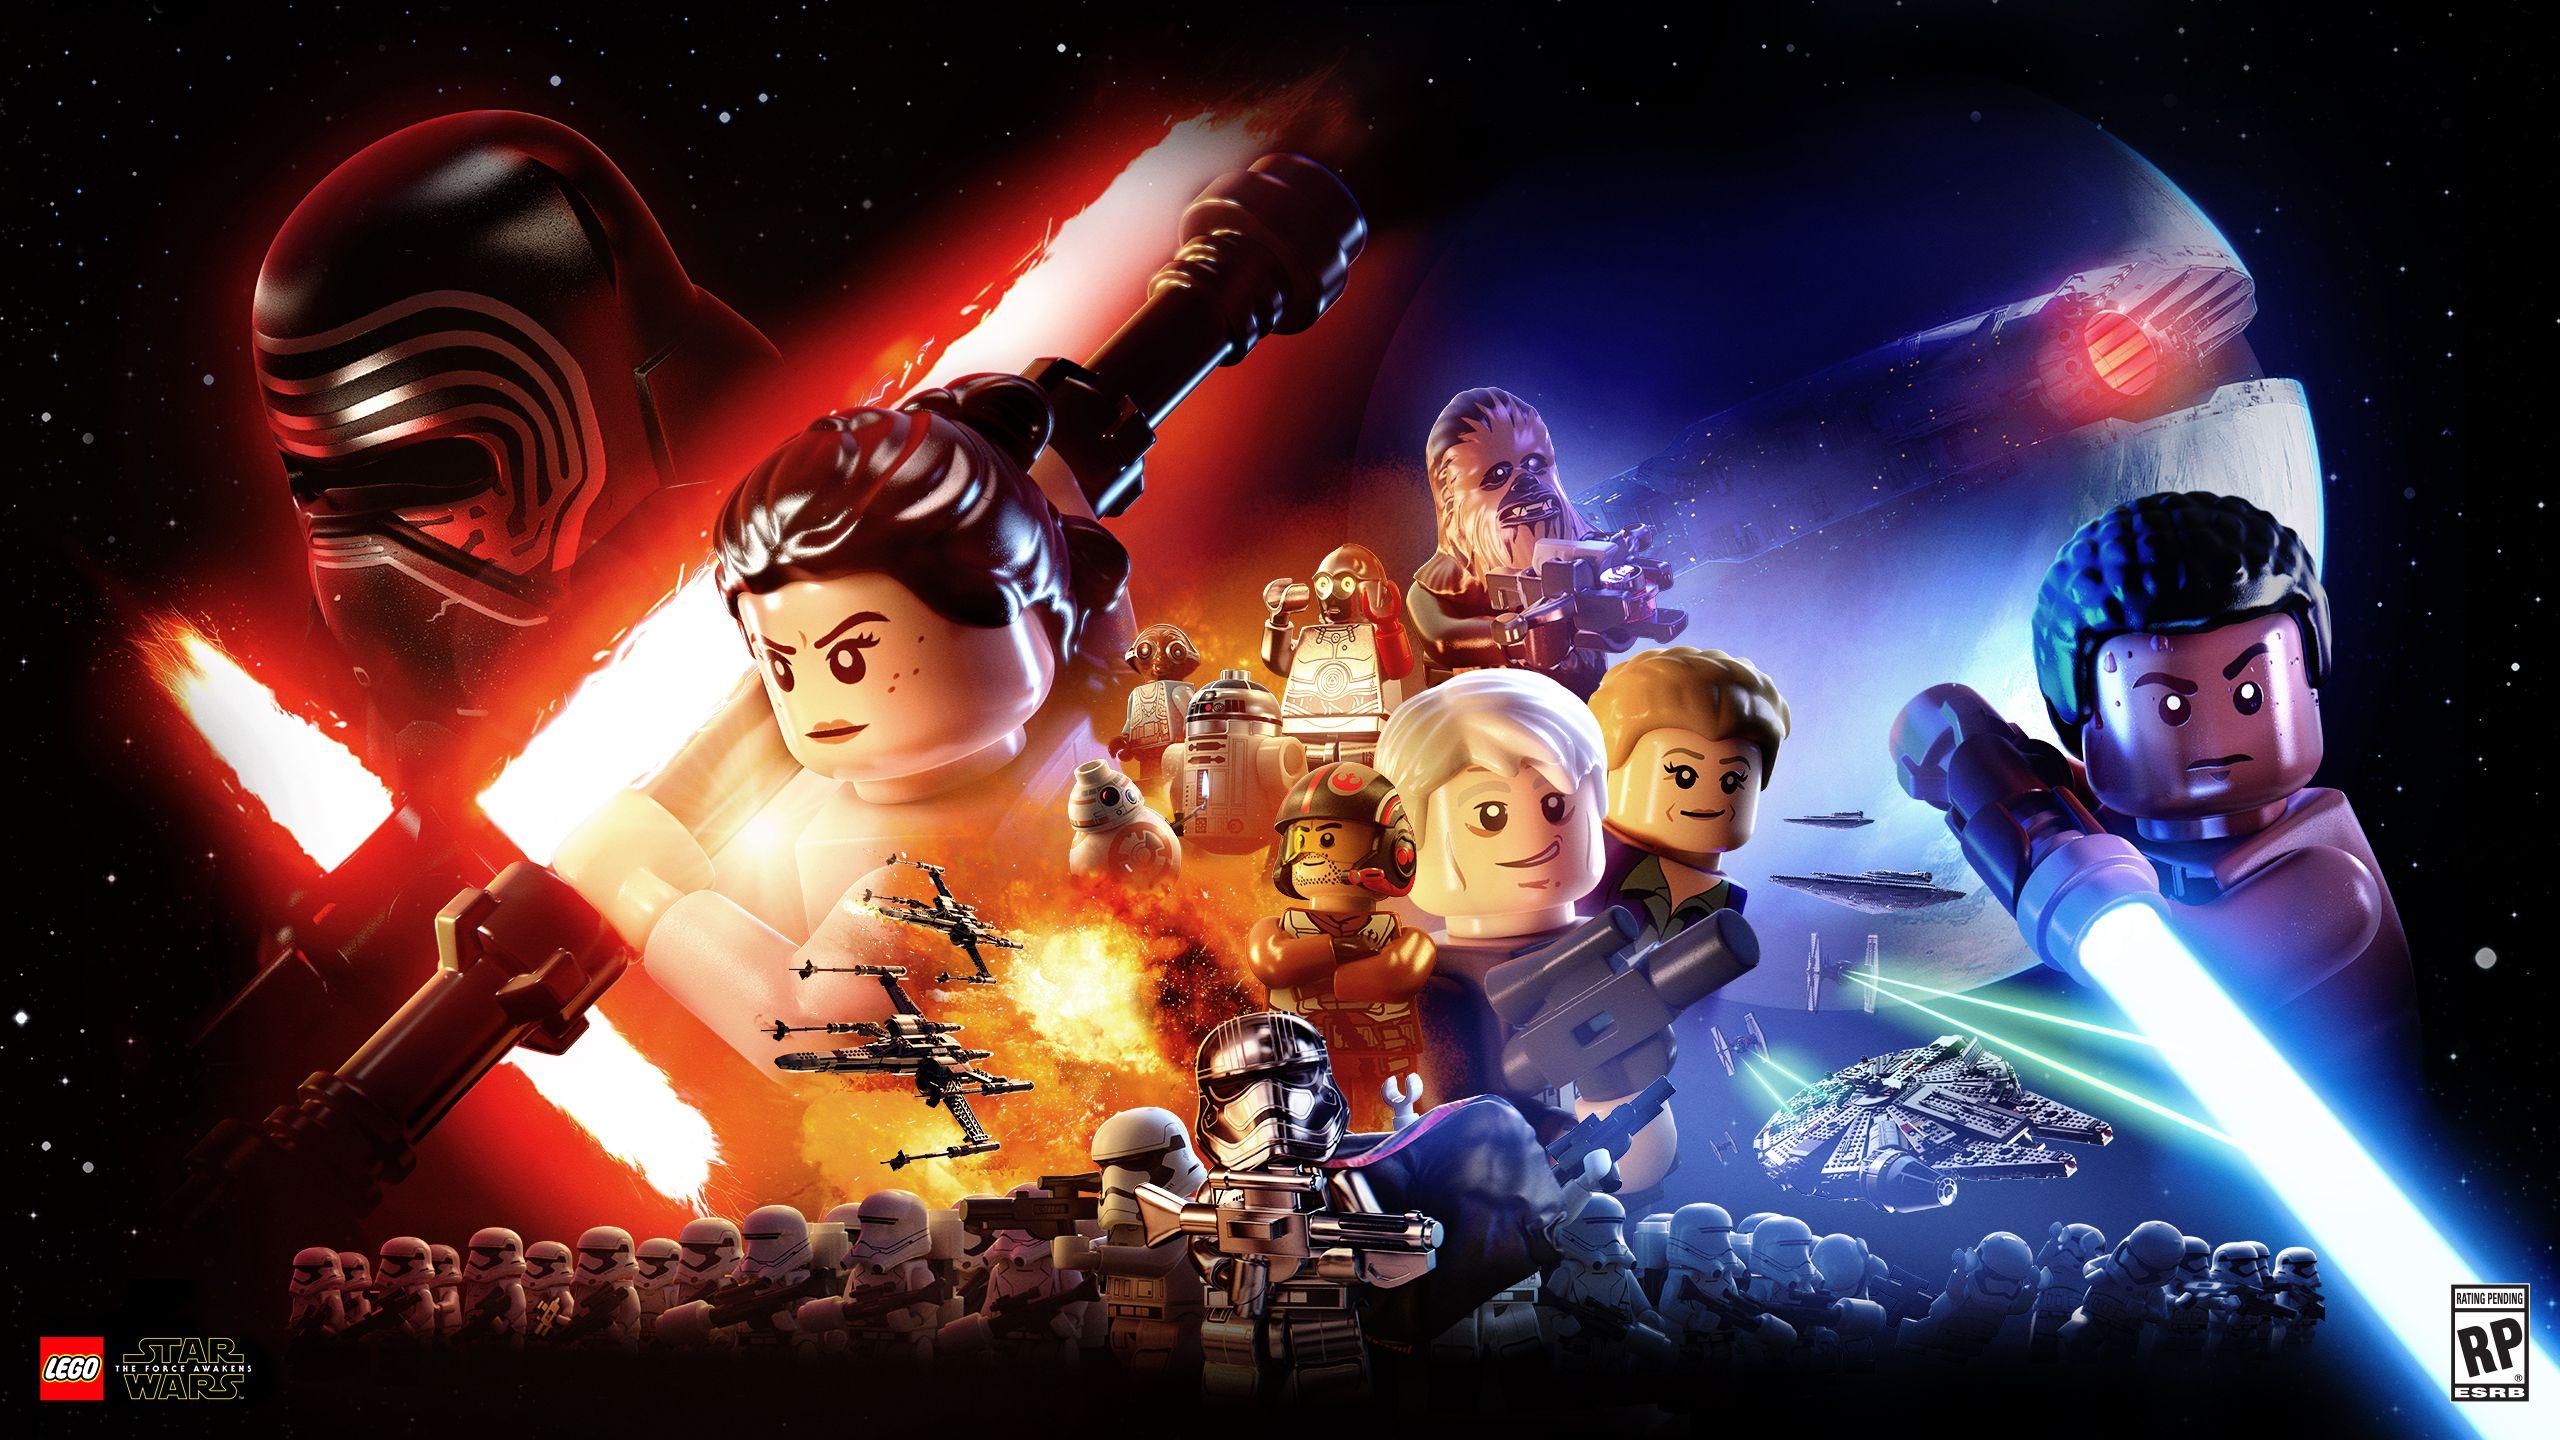 Lego Star Wars Wallpapers Top Free Lego Star Wars Backgrounds Wallpaperaccess